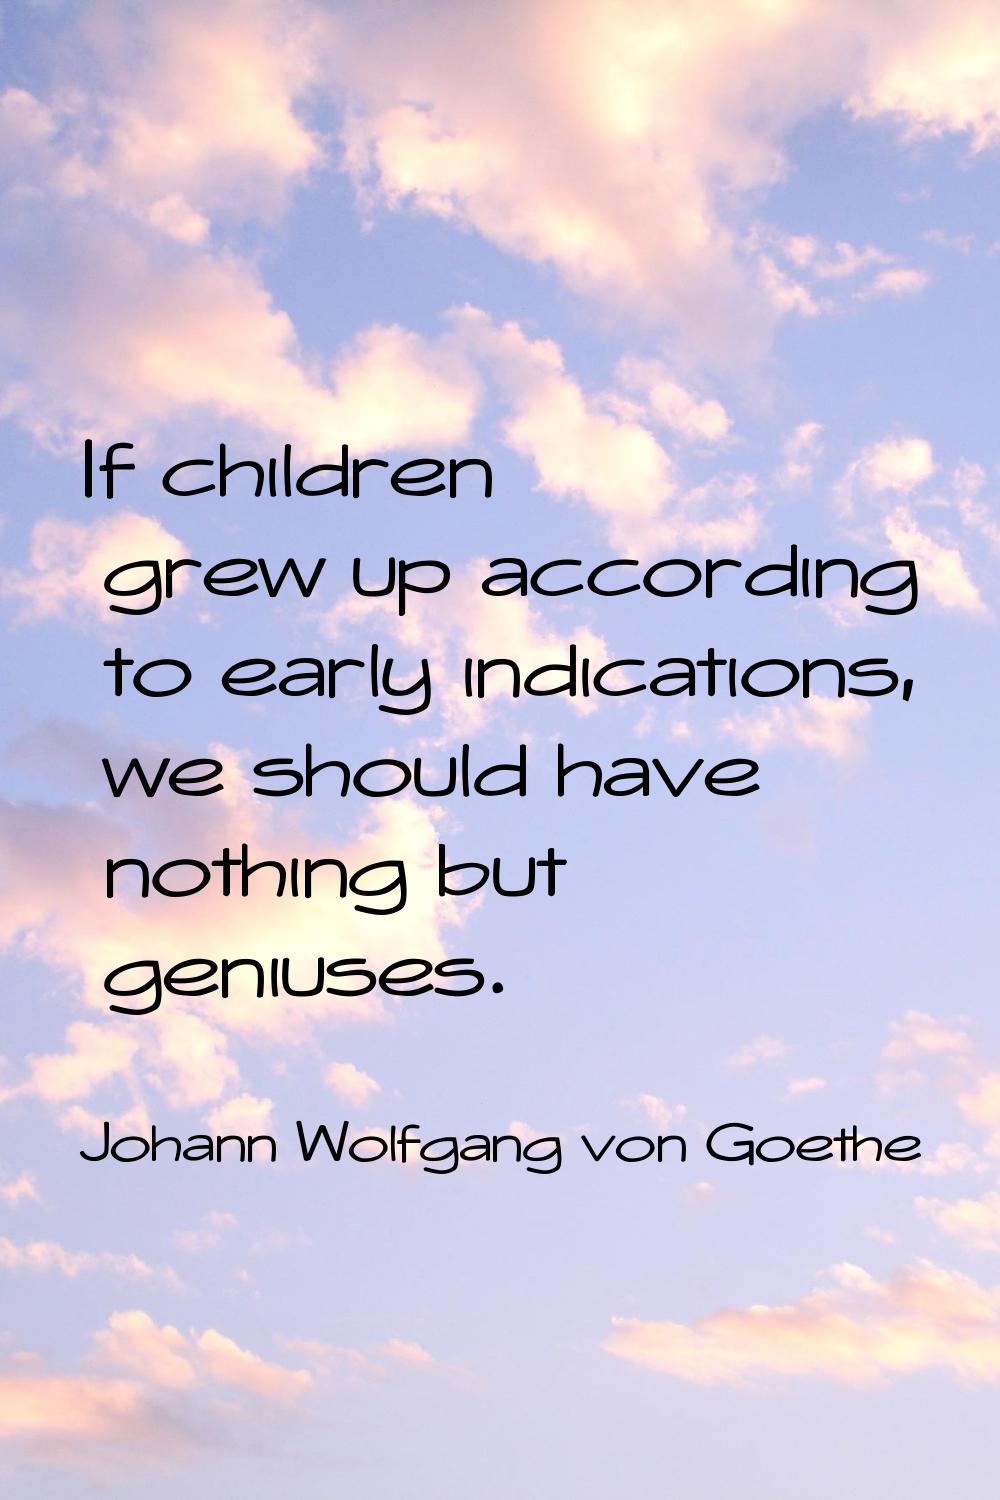 If children grew up according to early indications, we should have nothing but geniuses.